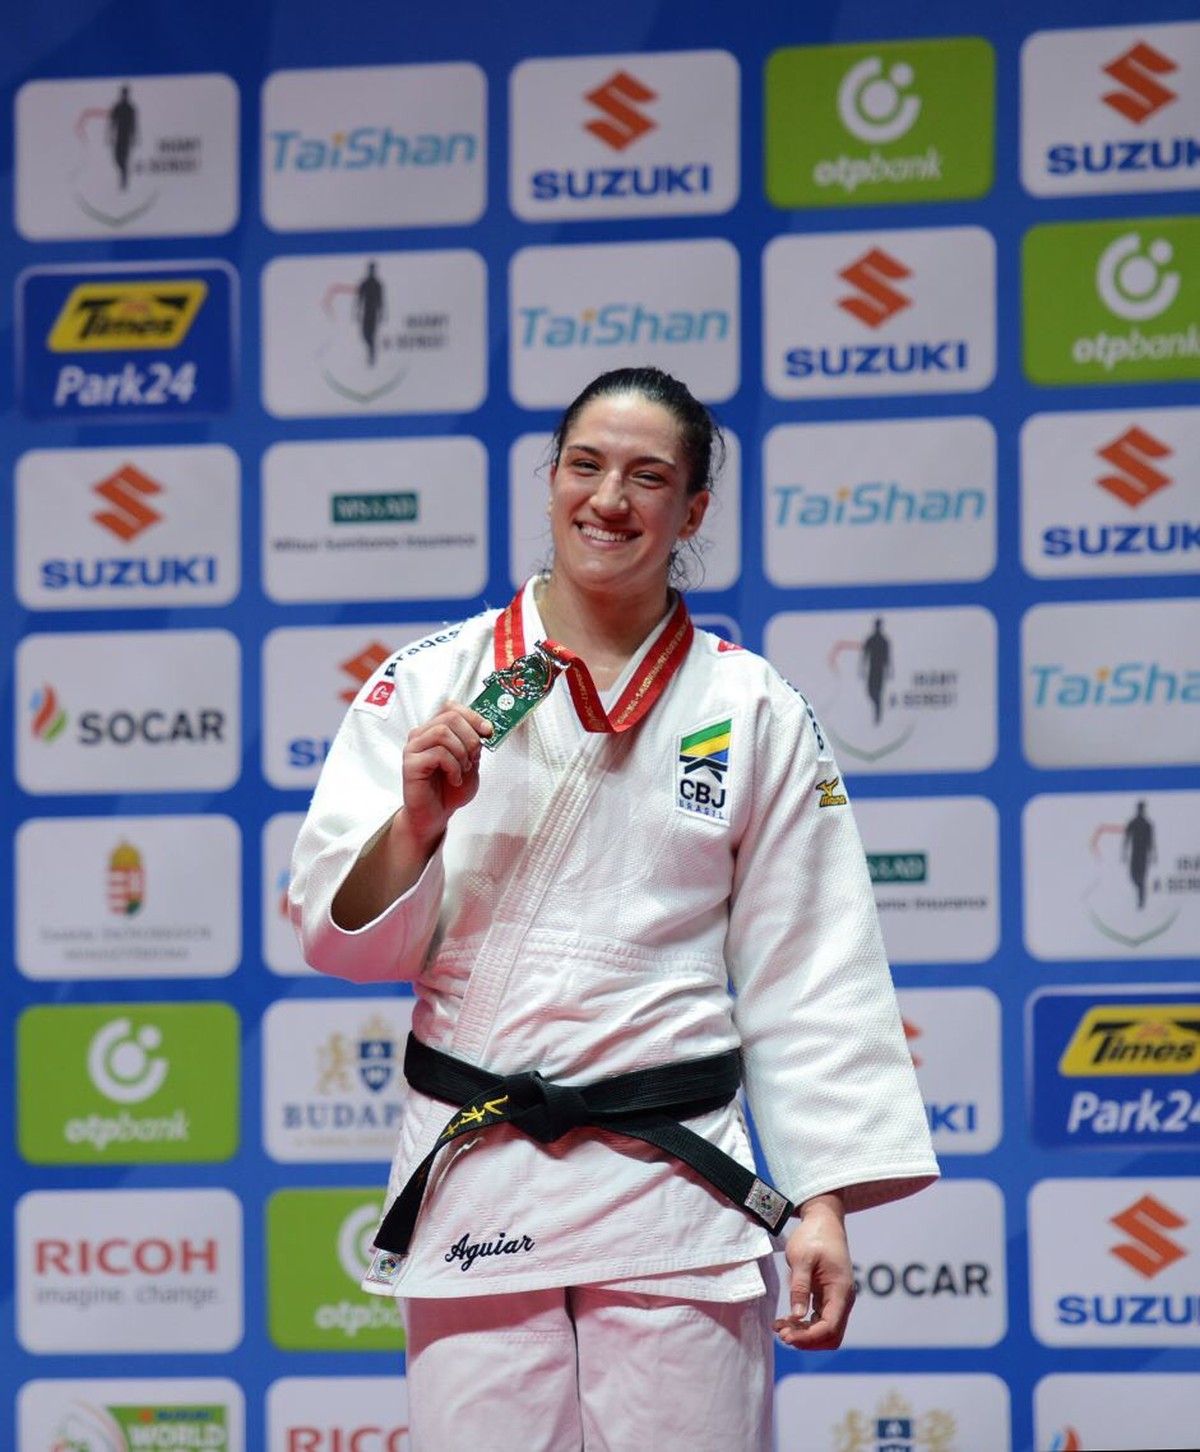 Favourites, candidates and underdogs: who’s who at the Judo World Cup |  brazil in paris